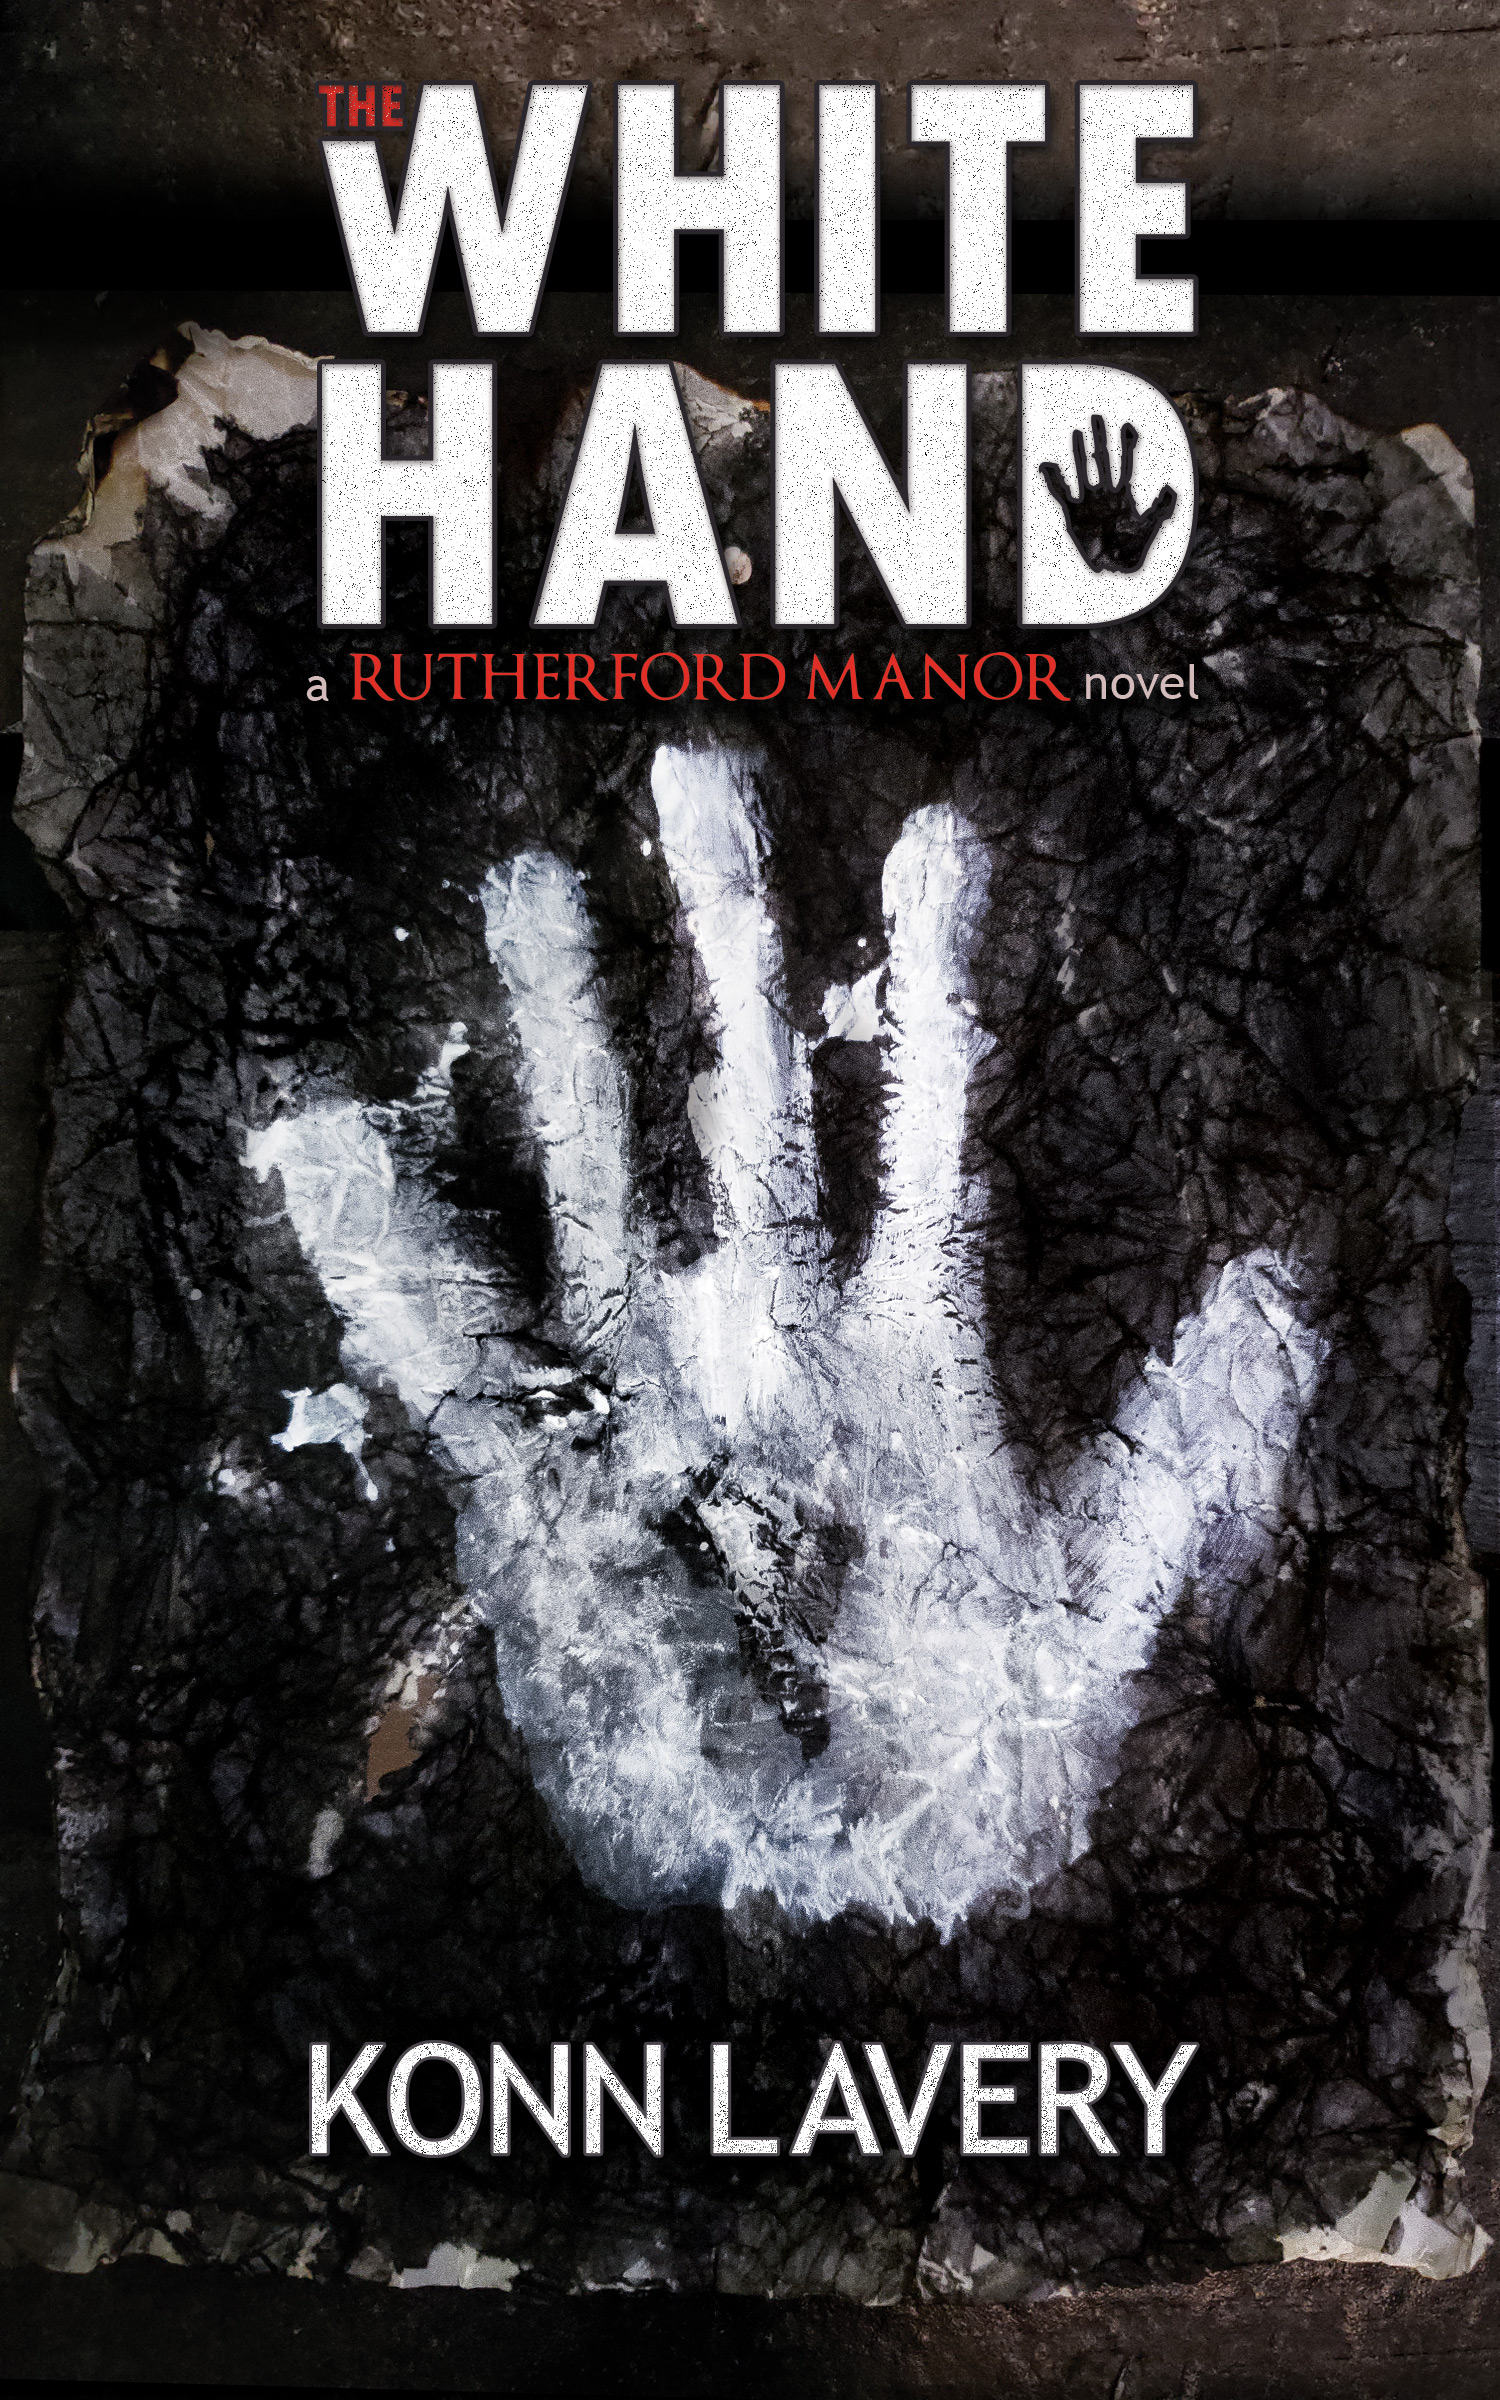 The White Hand, A Rutherford Manor Novel by Konn Lavery